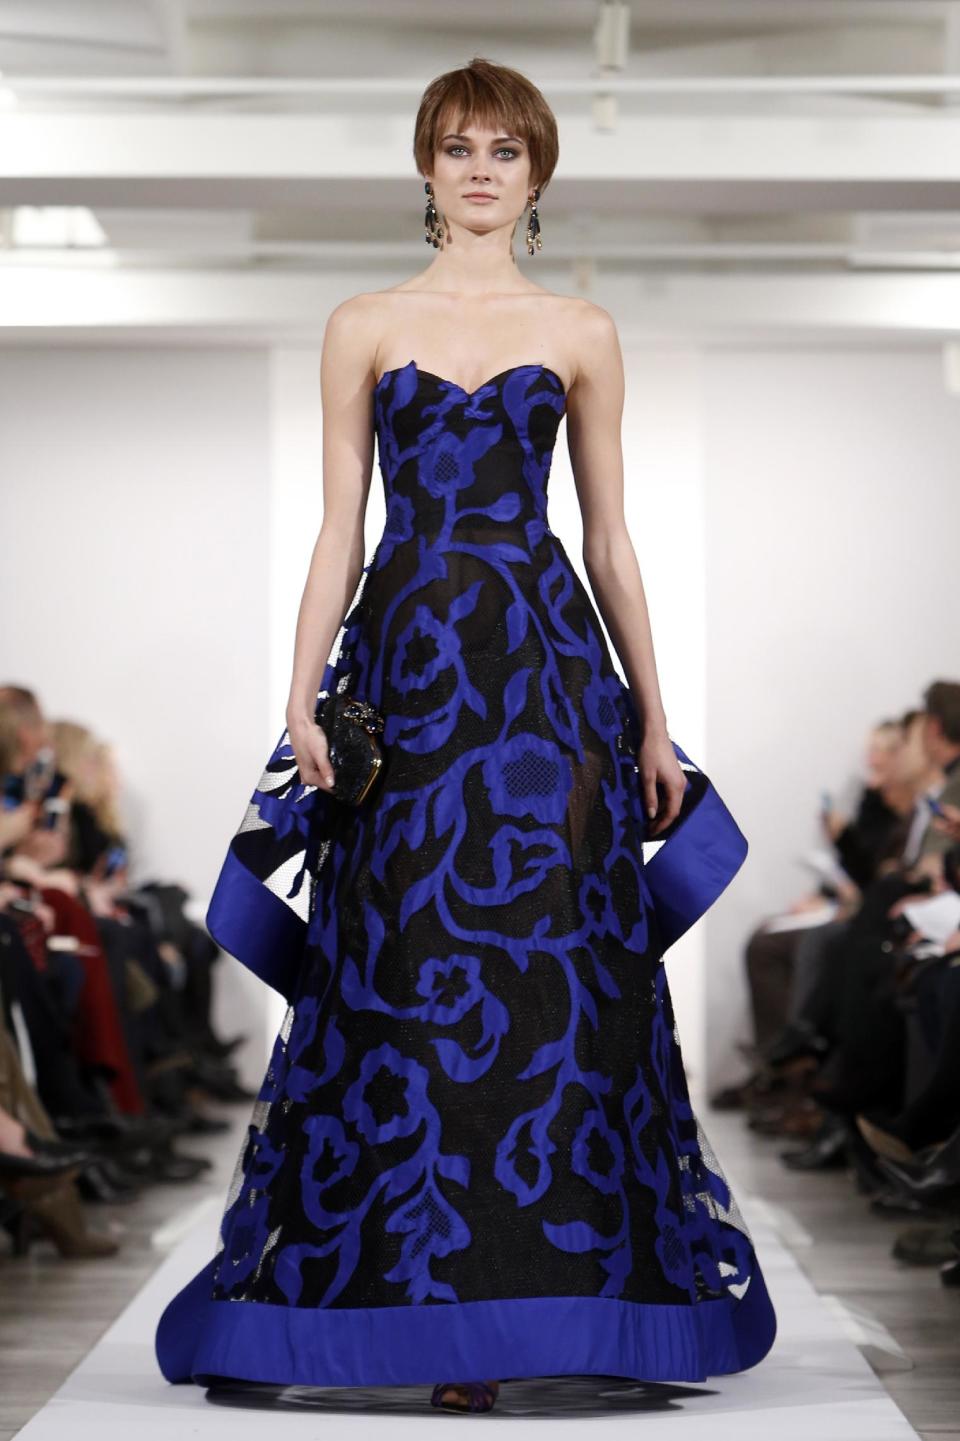 The Oscar de la Renta Fall 2014 collection is modeled during Fashion Week in New York, Tuesday, Feb. 11, 2014. (AP Photo/Jason DeCrow)